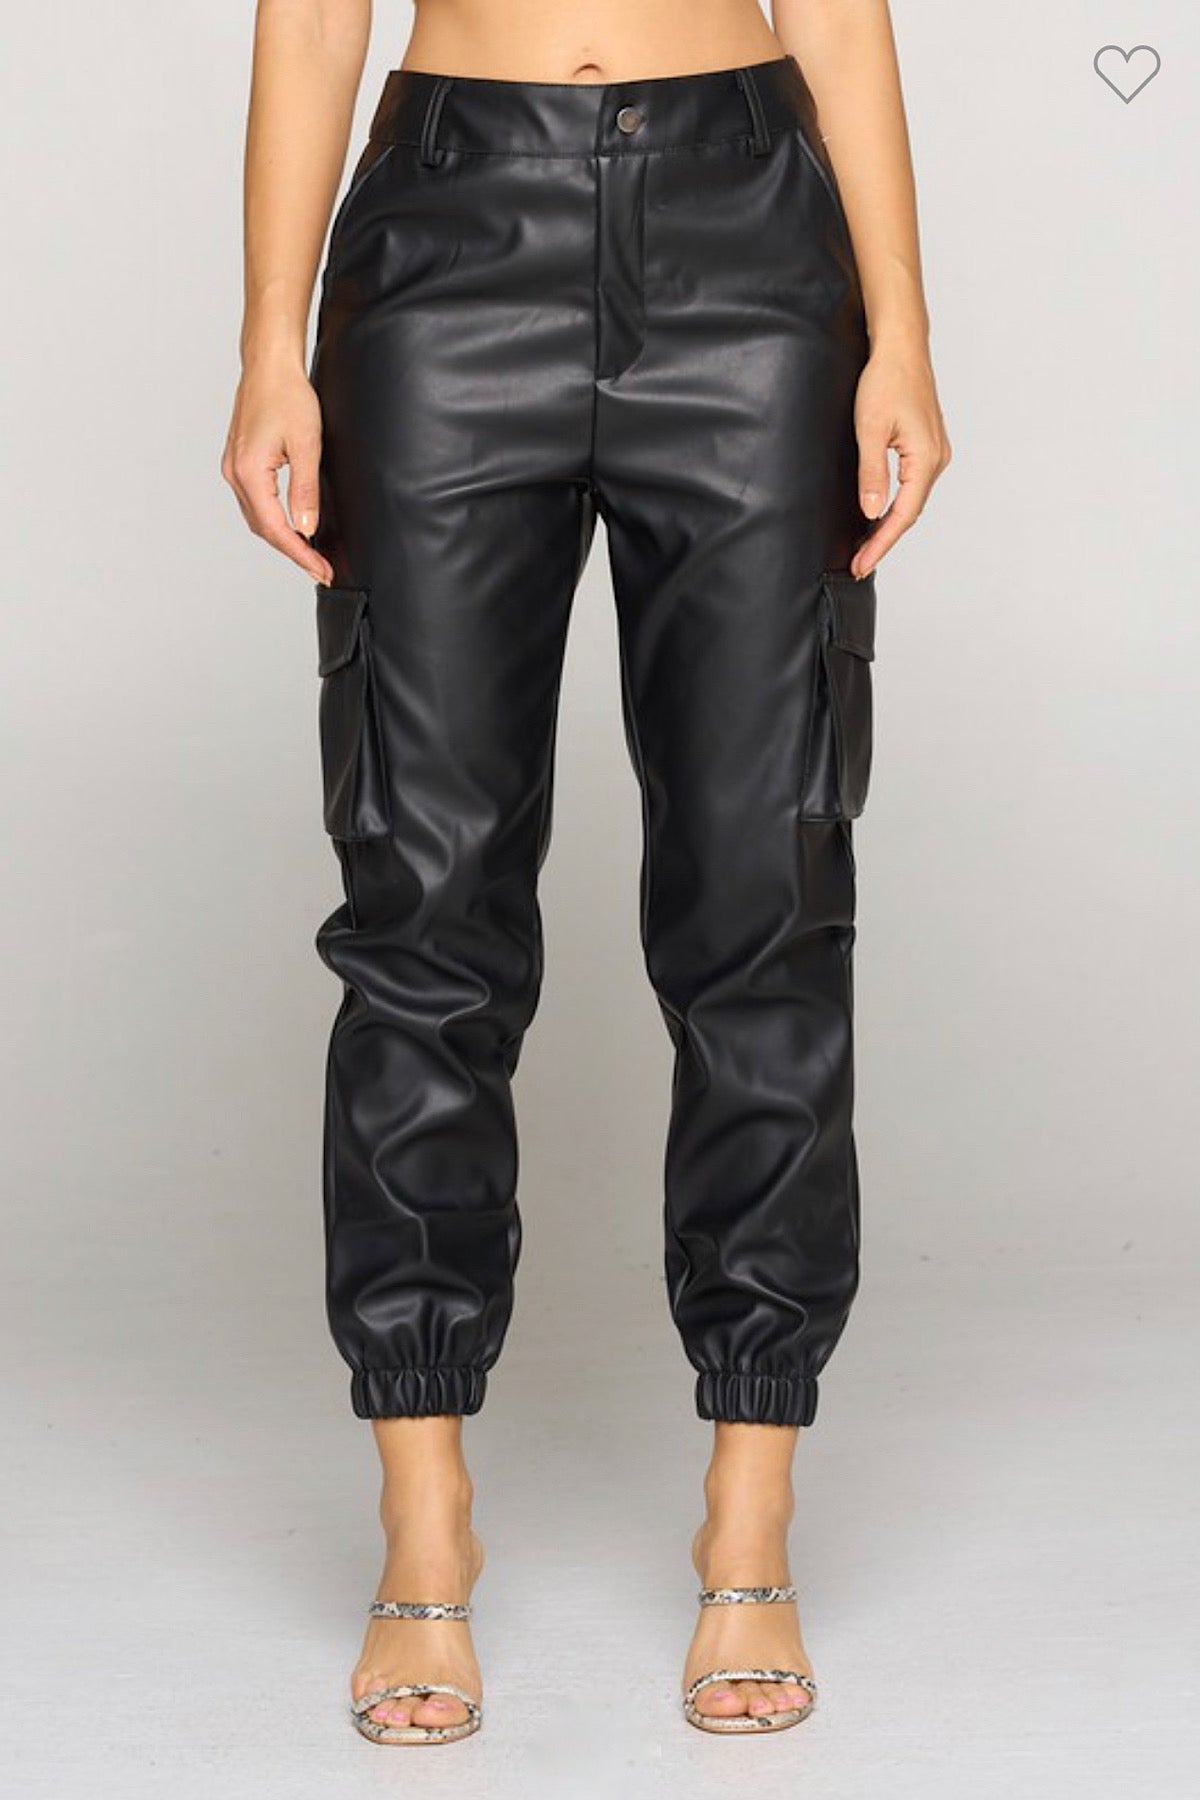 Work it Faux leather cargo pants